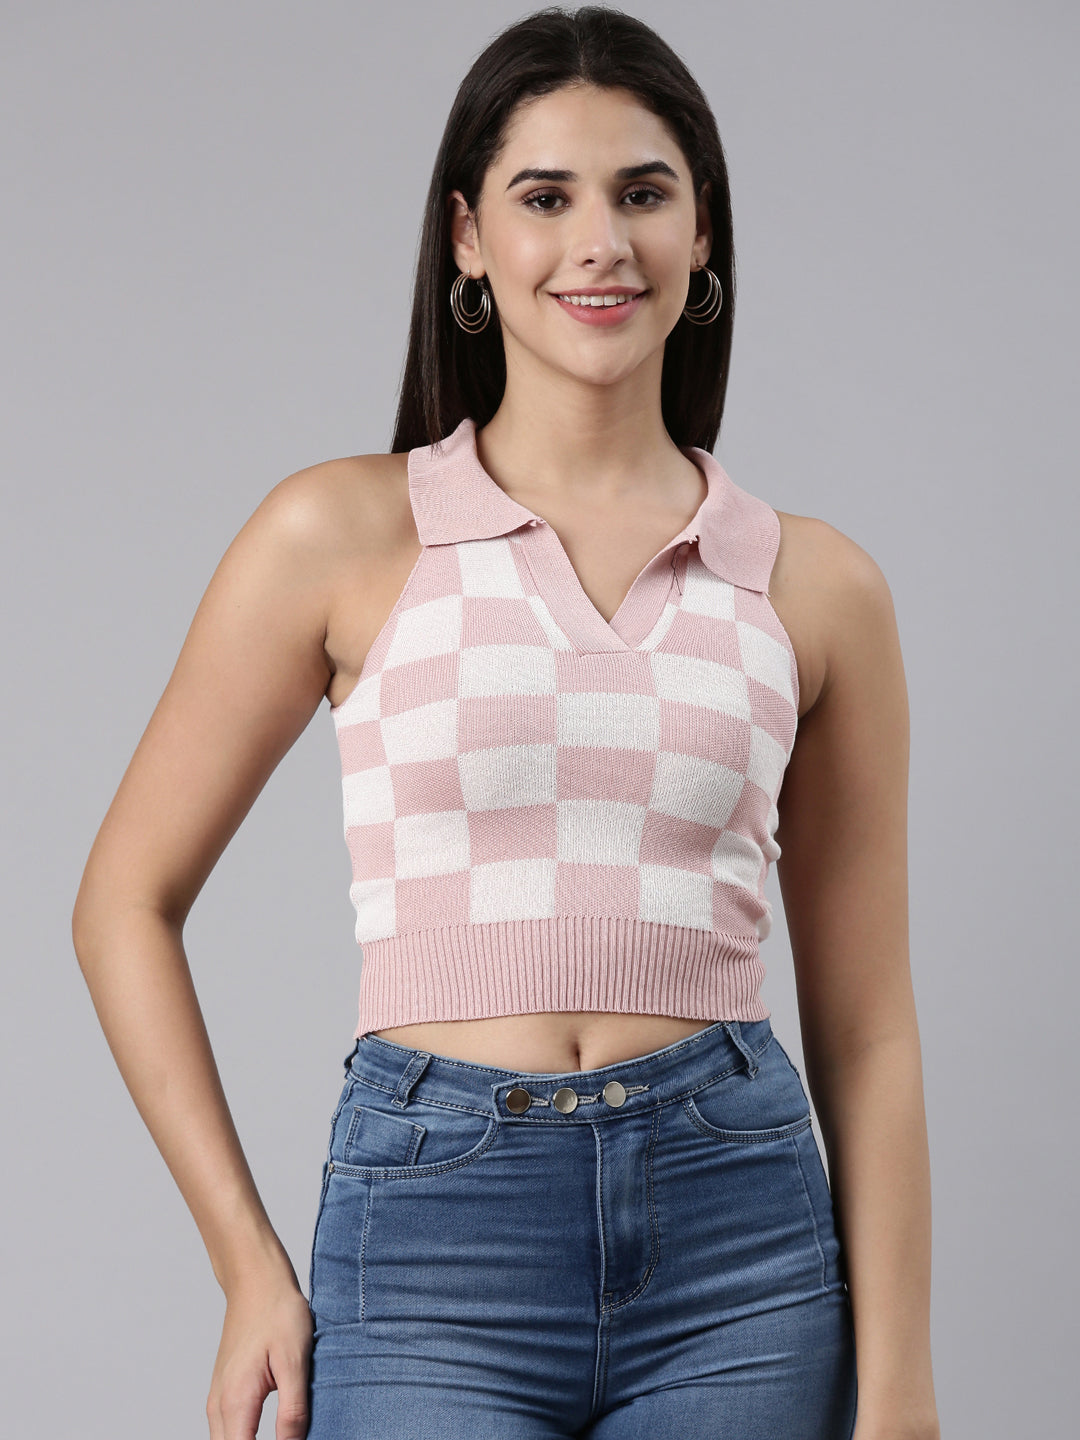 Above the Keyboard Collar Checked Pink Cinched Waist Crop Top